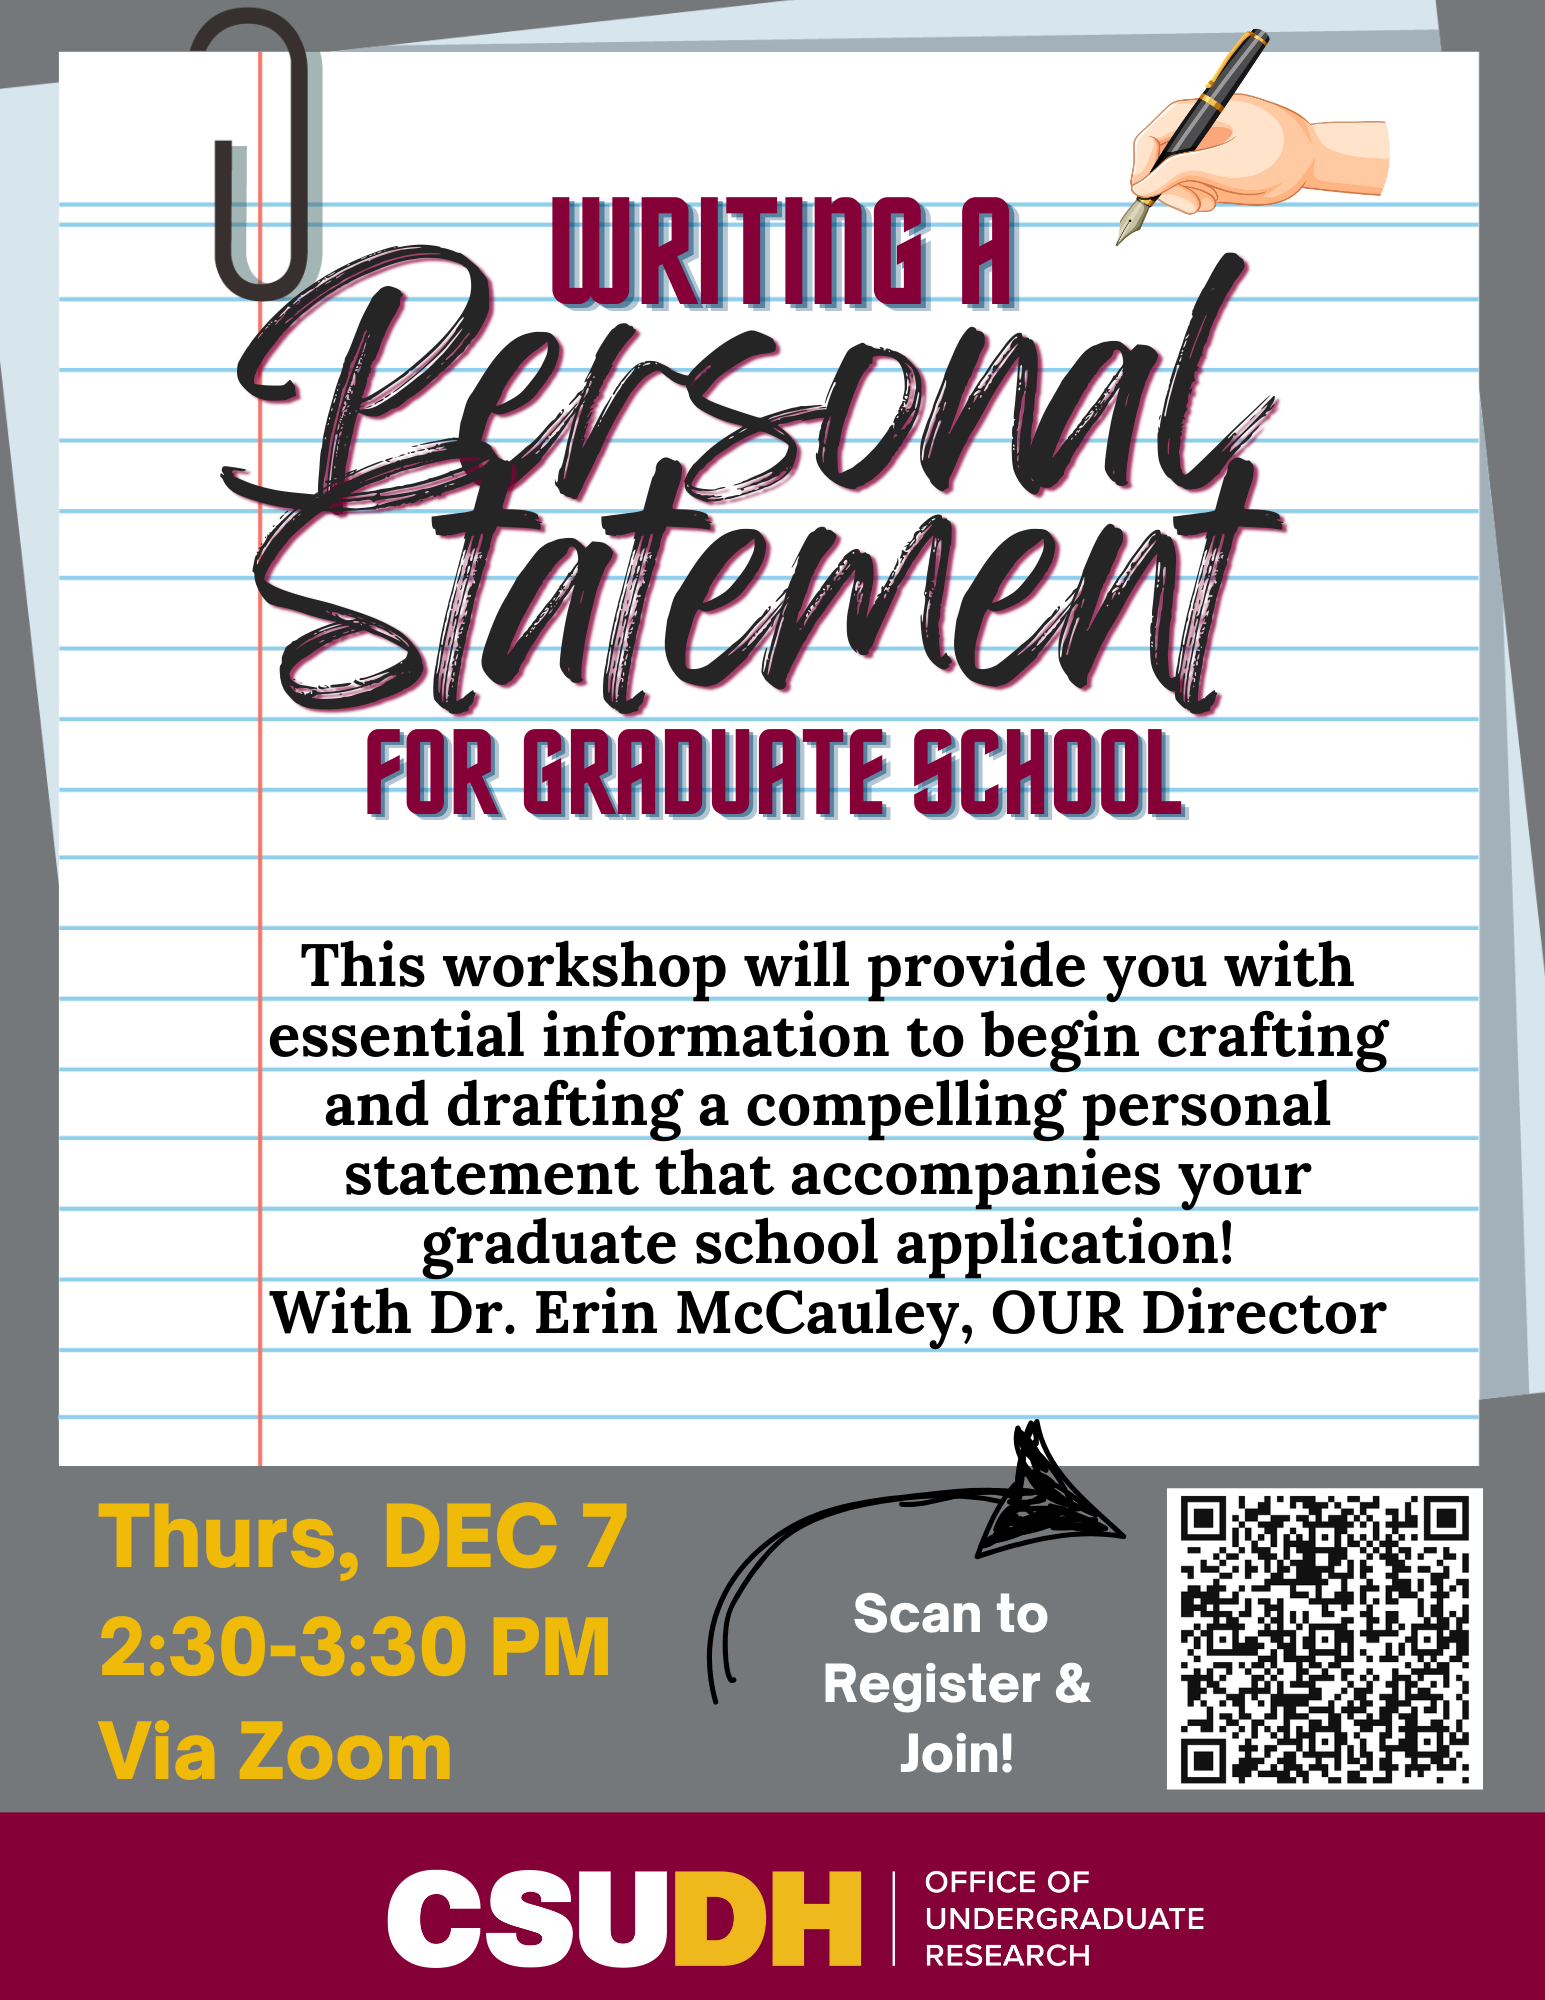 Writing a personal Statement for Graduate School